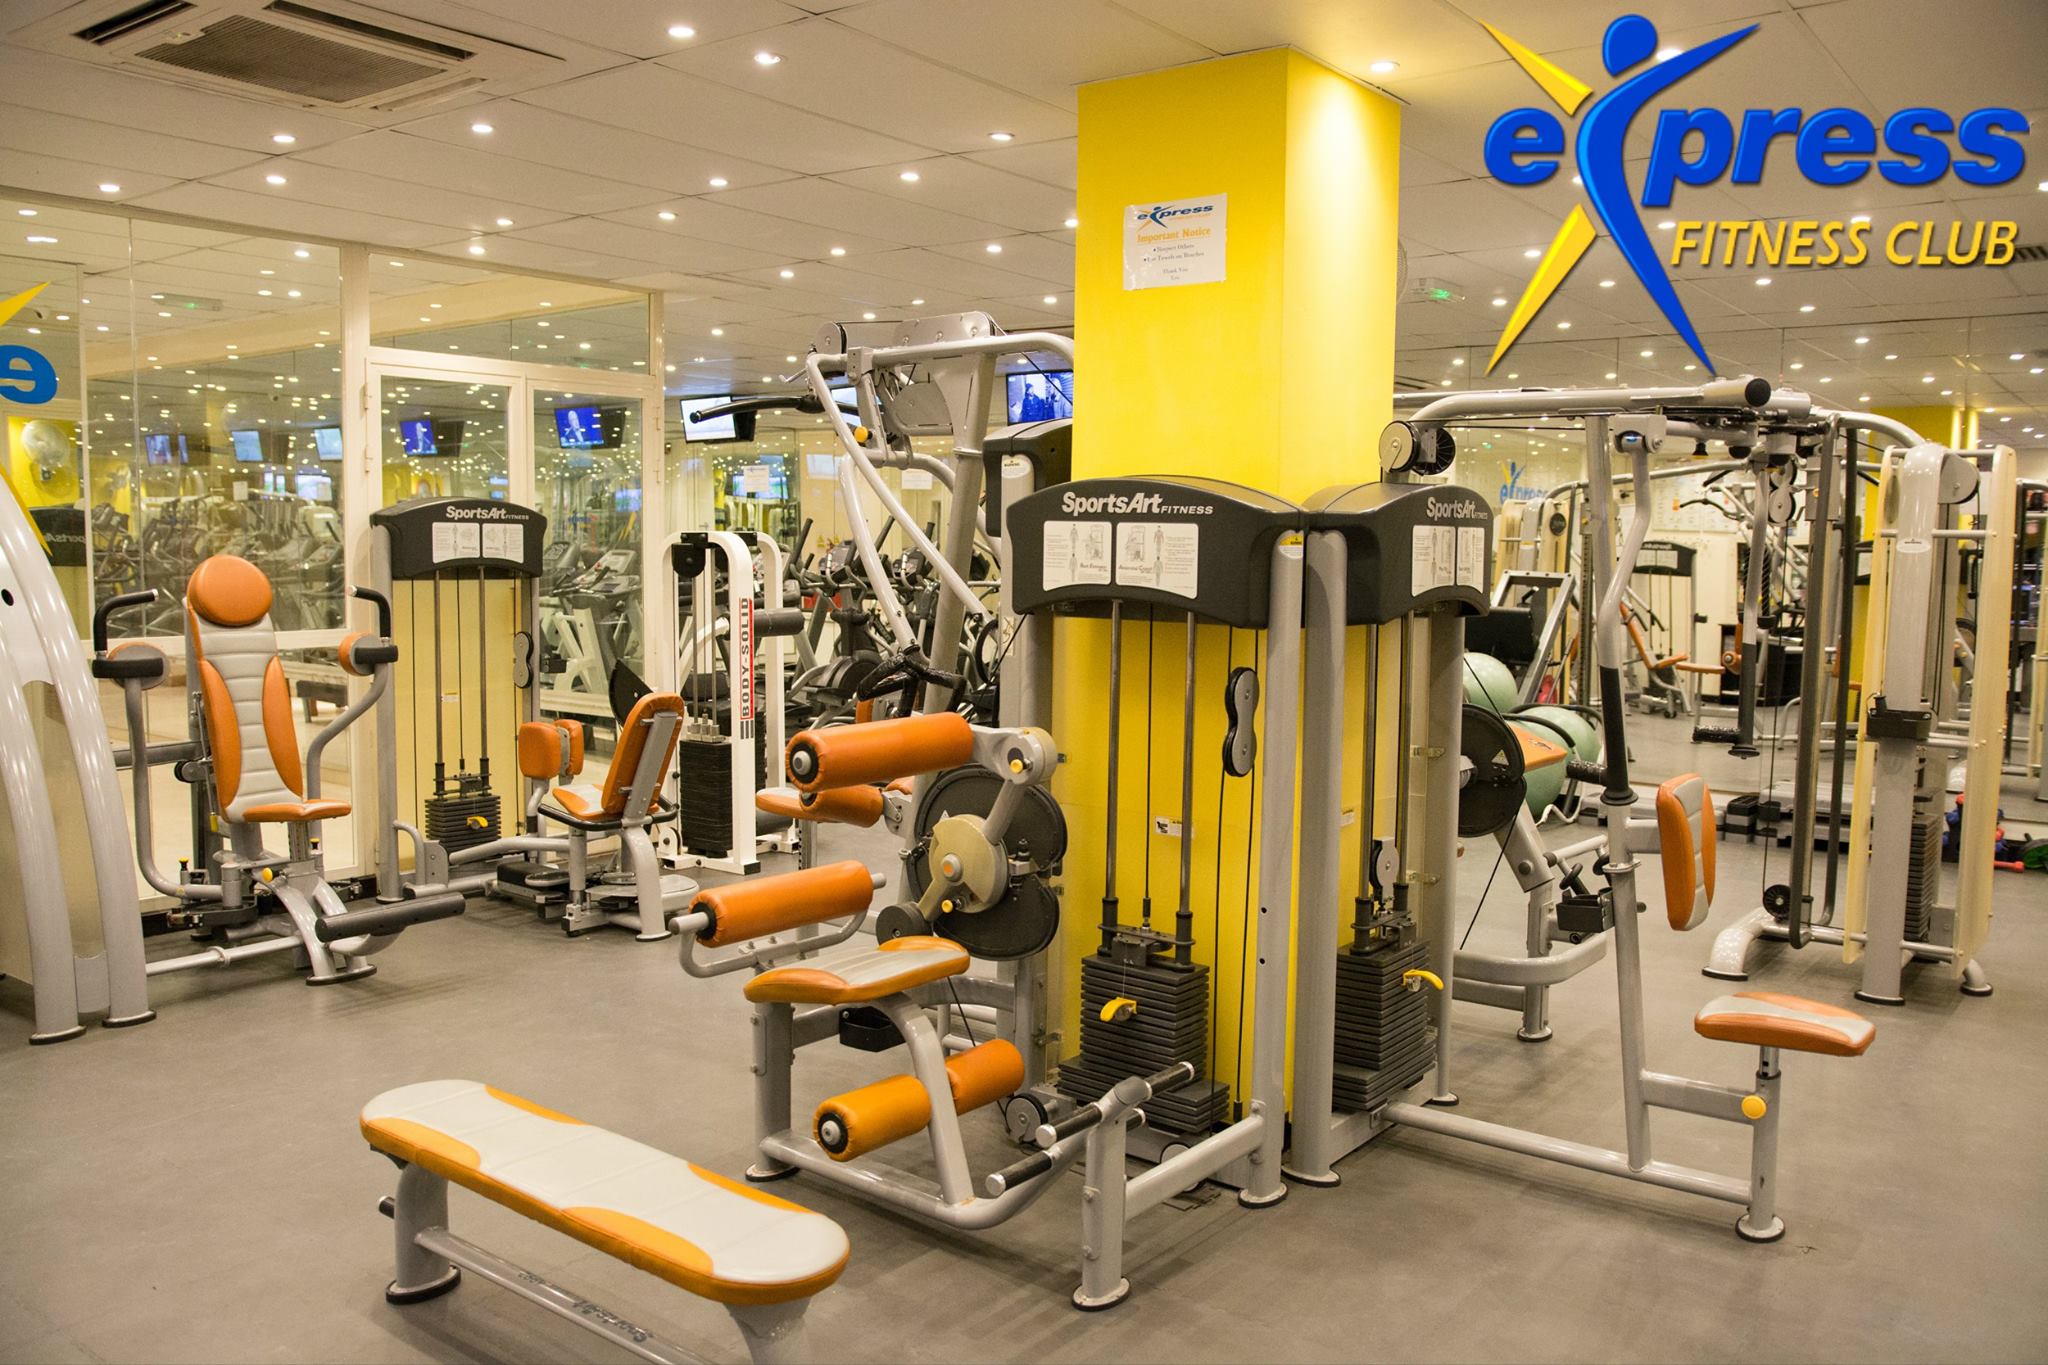 Express Fitness Club – A state of the art Fitness Club at the North of Malta